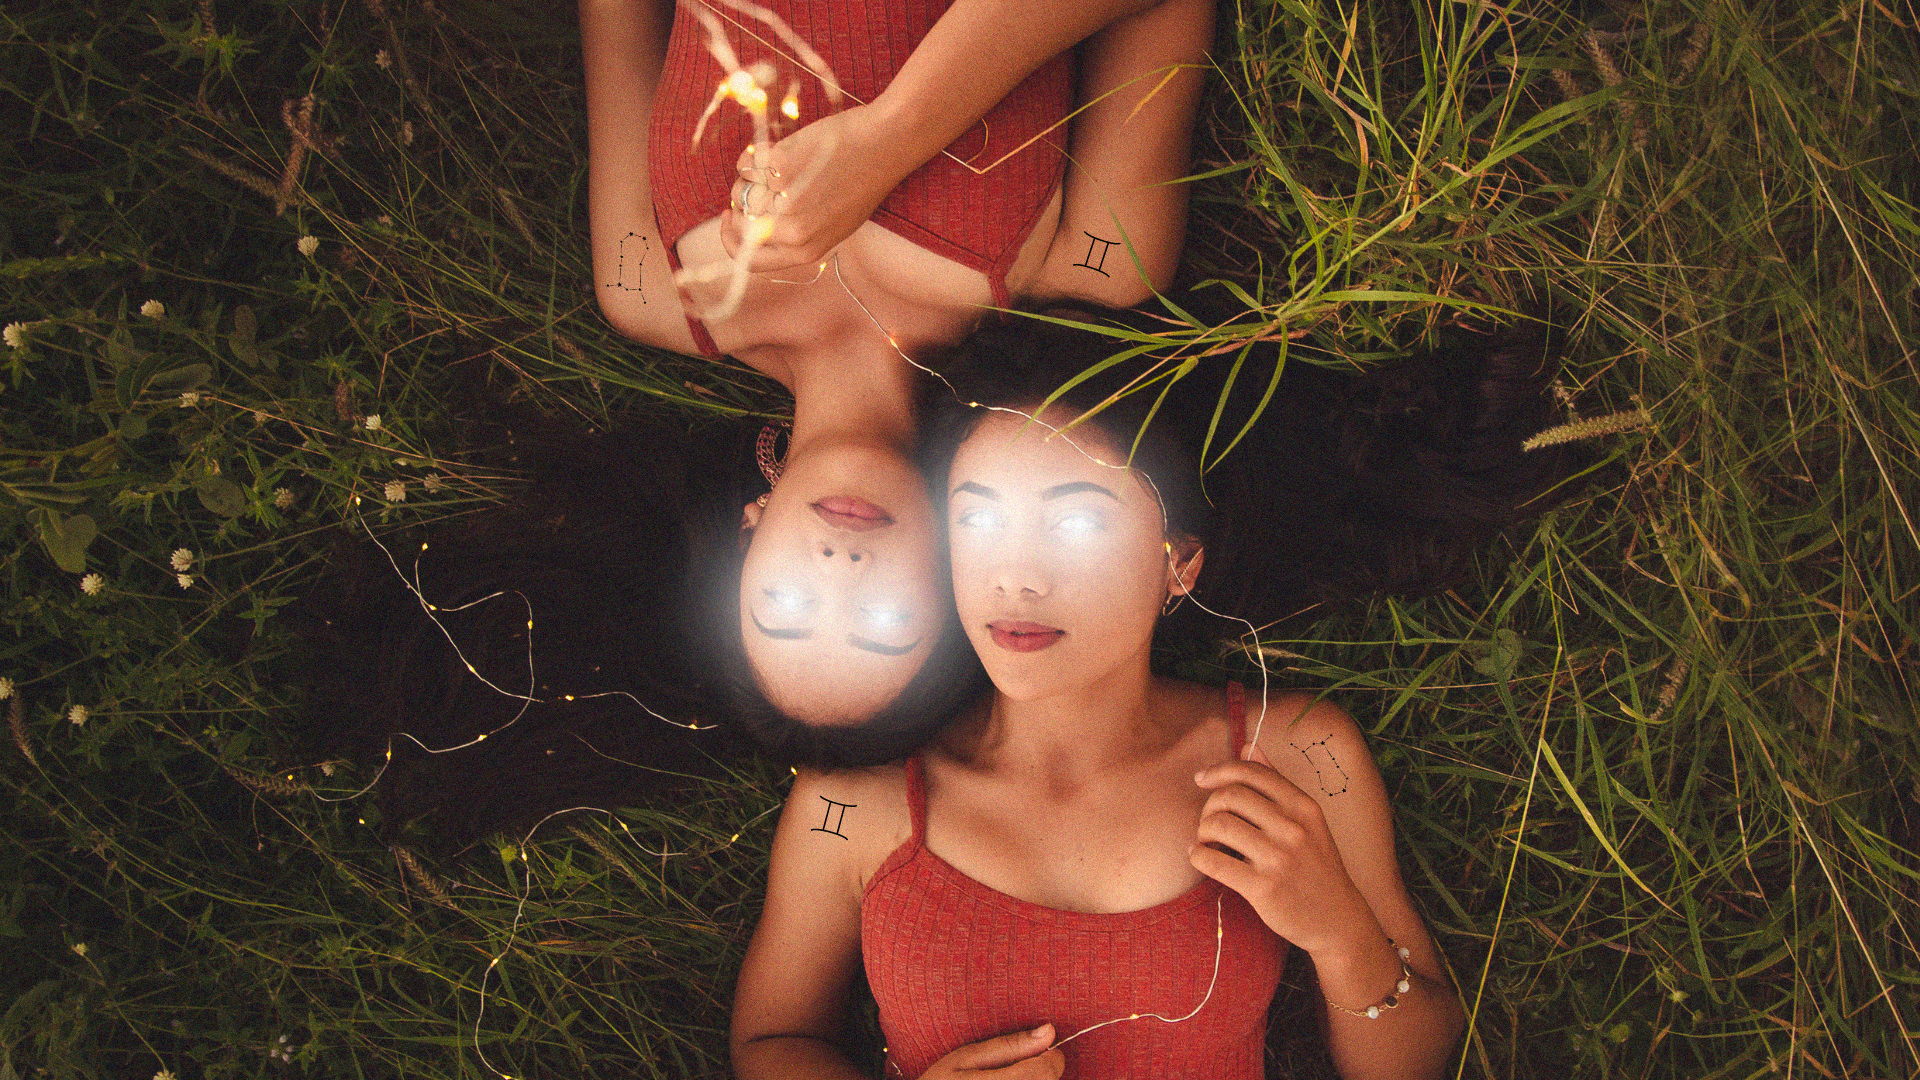 Twins laying down in grass with light beams coming from their eyes and Gemini tattoos.